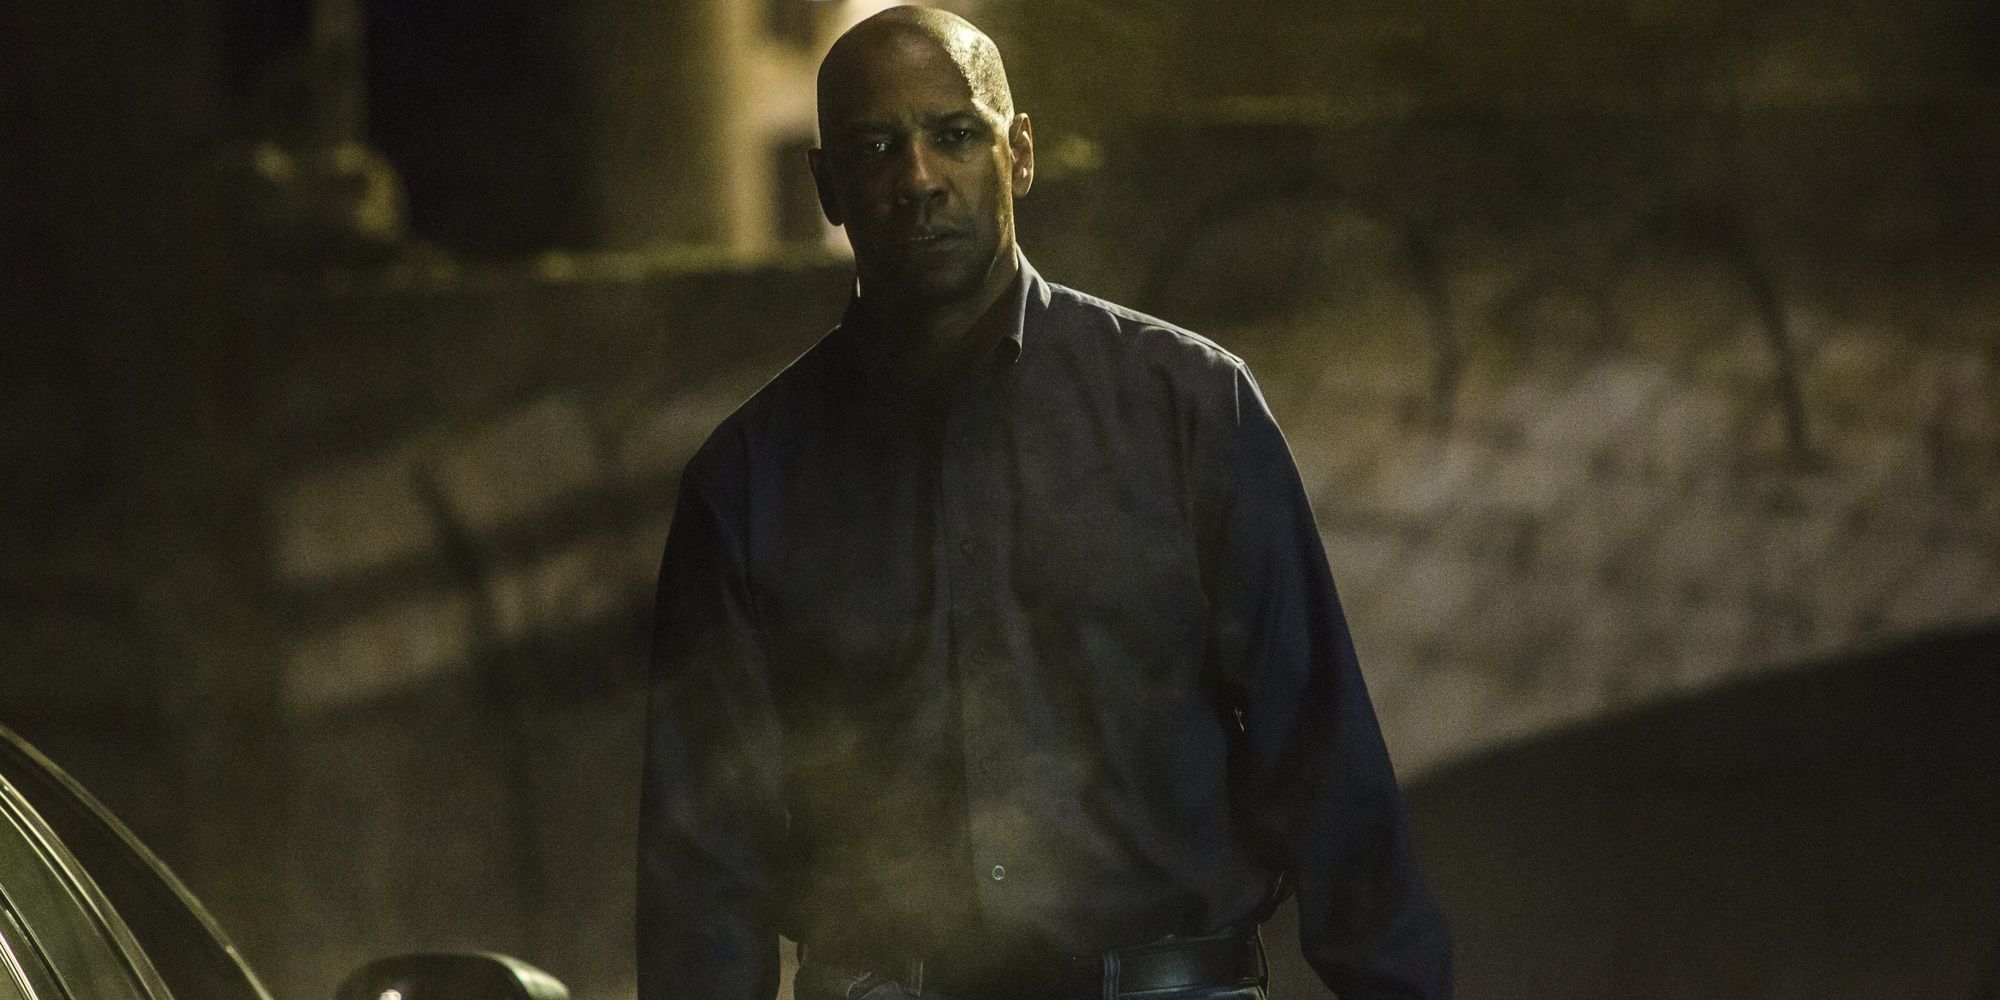 Denzel Washington on the street at night in The Equalizer